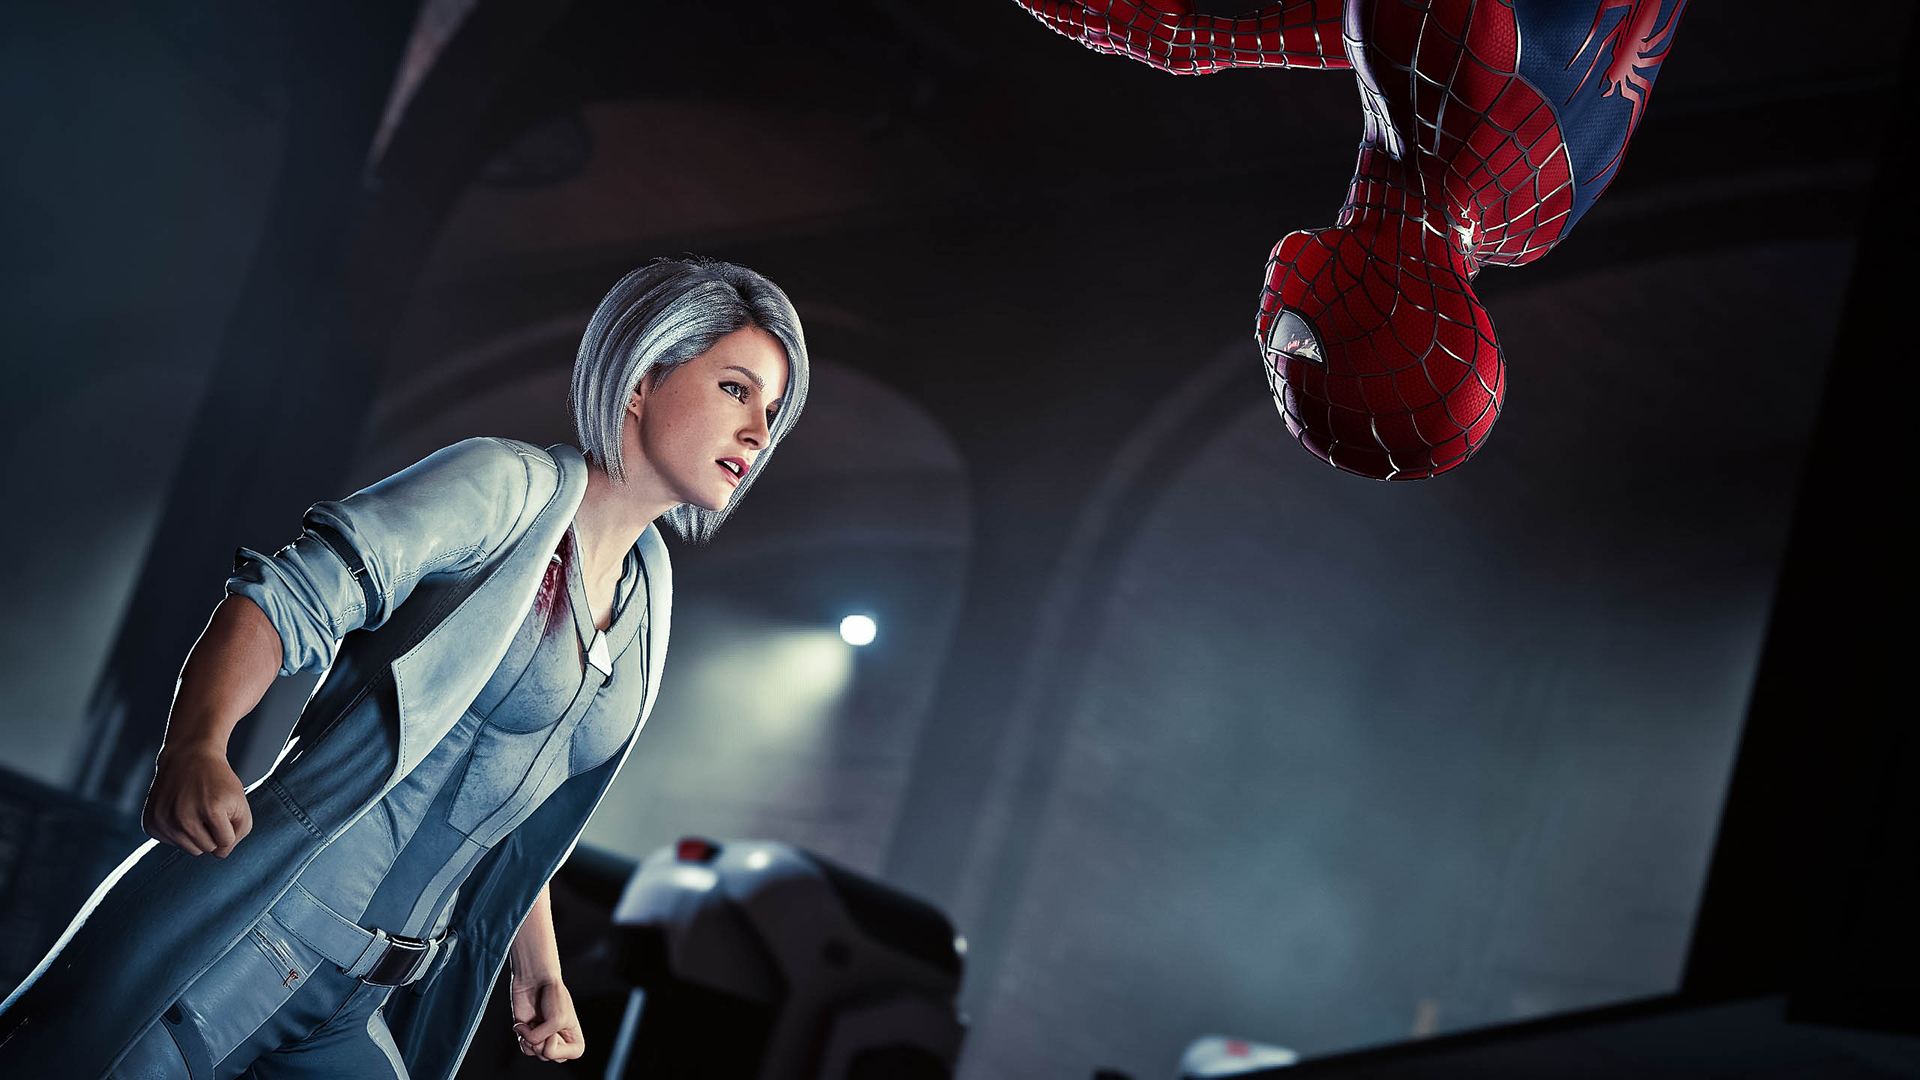 General 1920x1080 Spider-Man (2018) Spider-Man silver sable video games superhero video game girls blood video game characters fist silver hair women Insomniac Games CGI